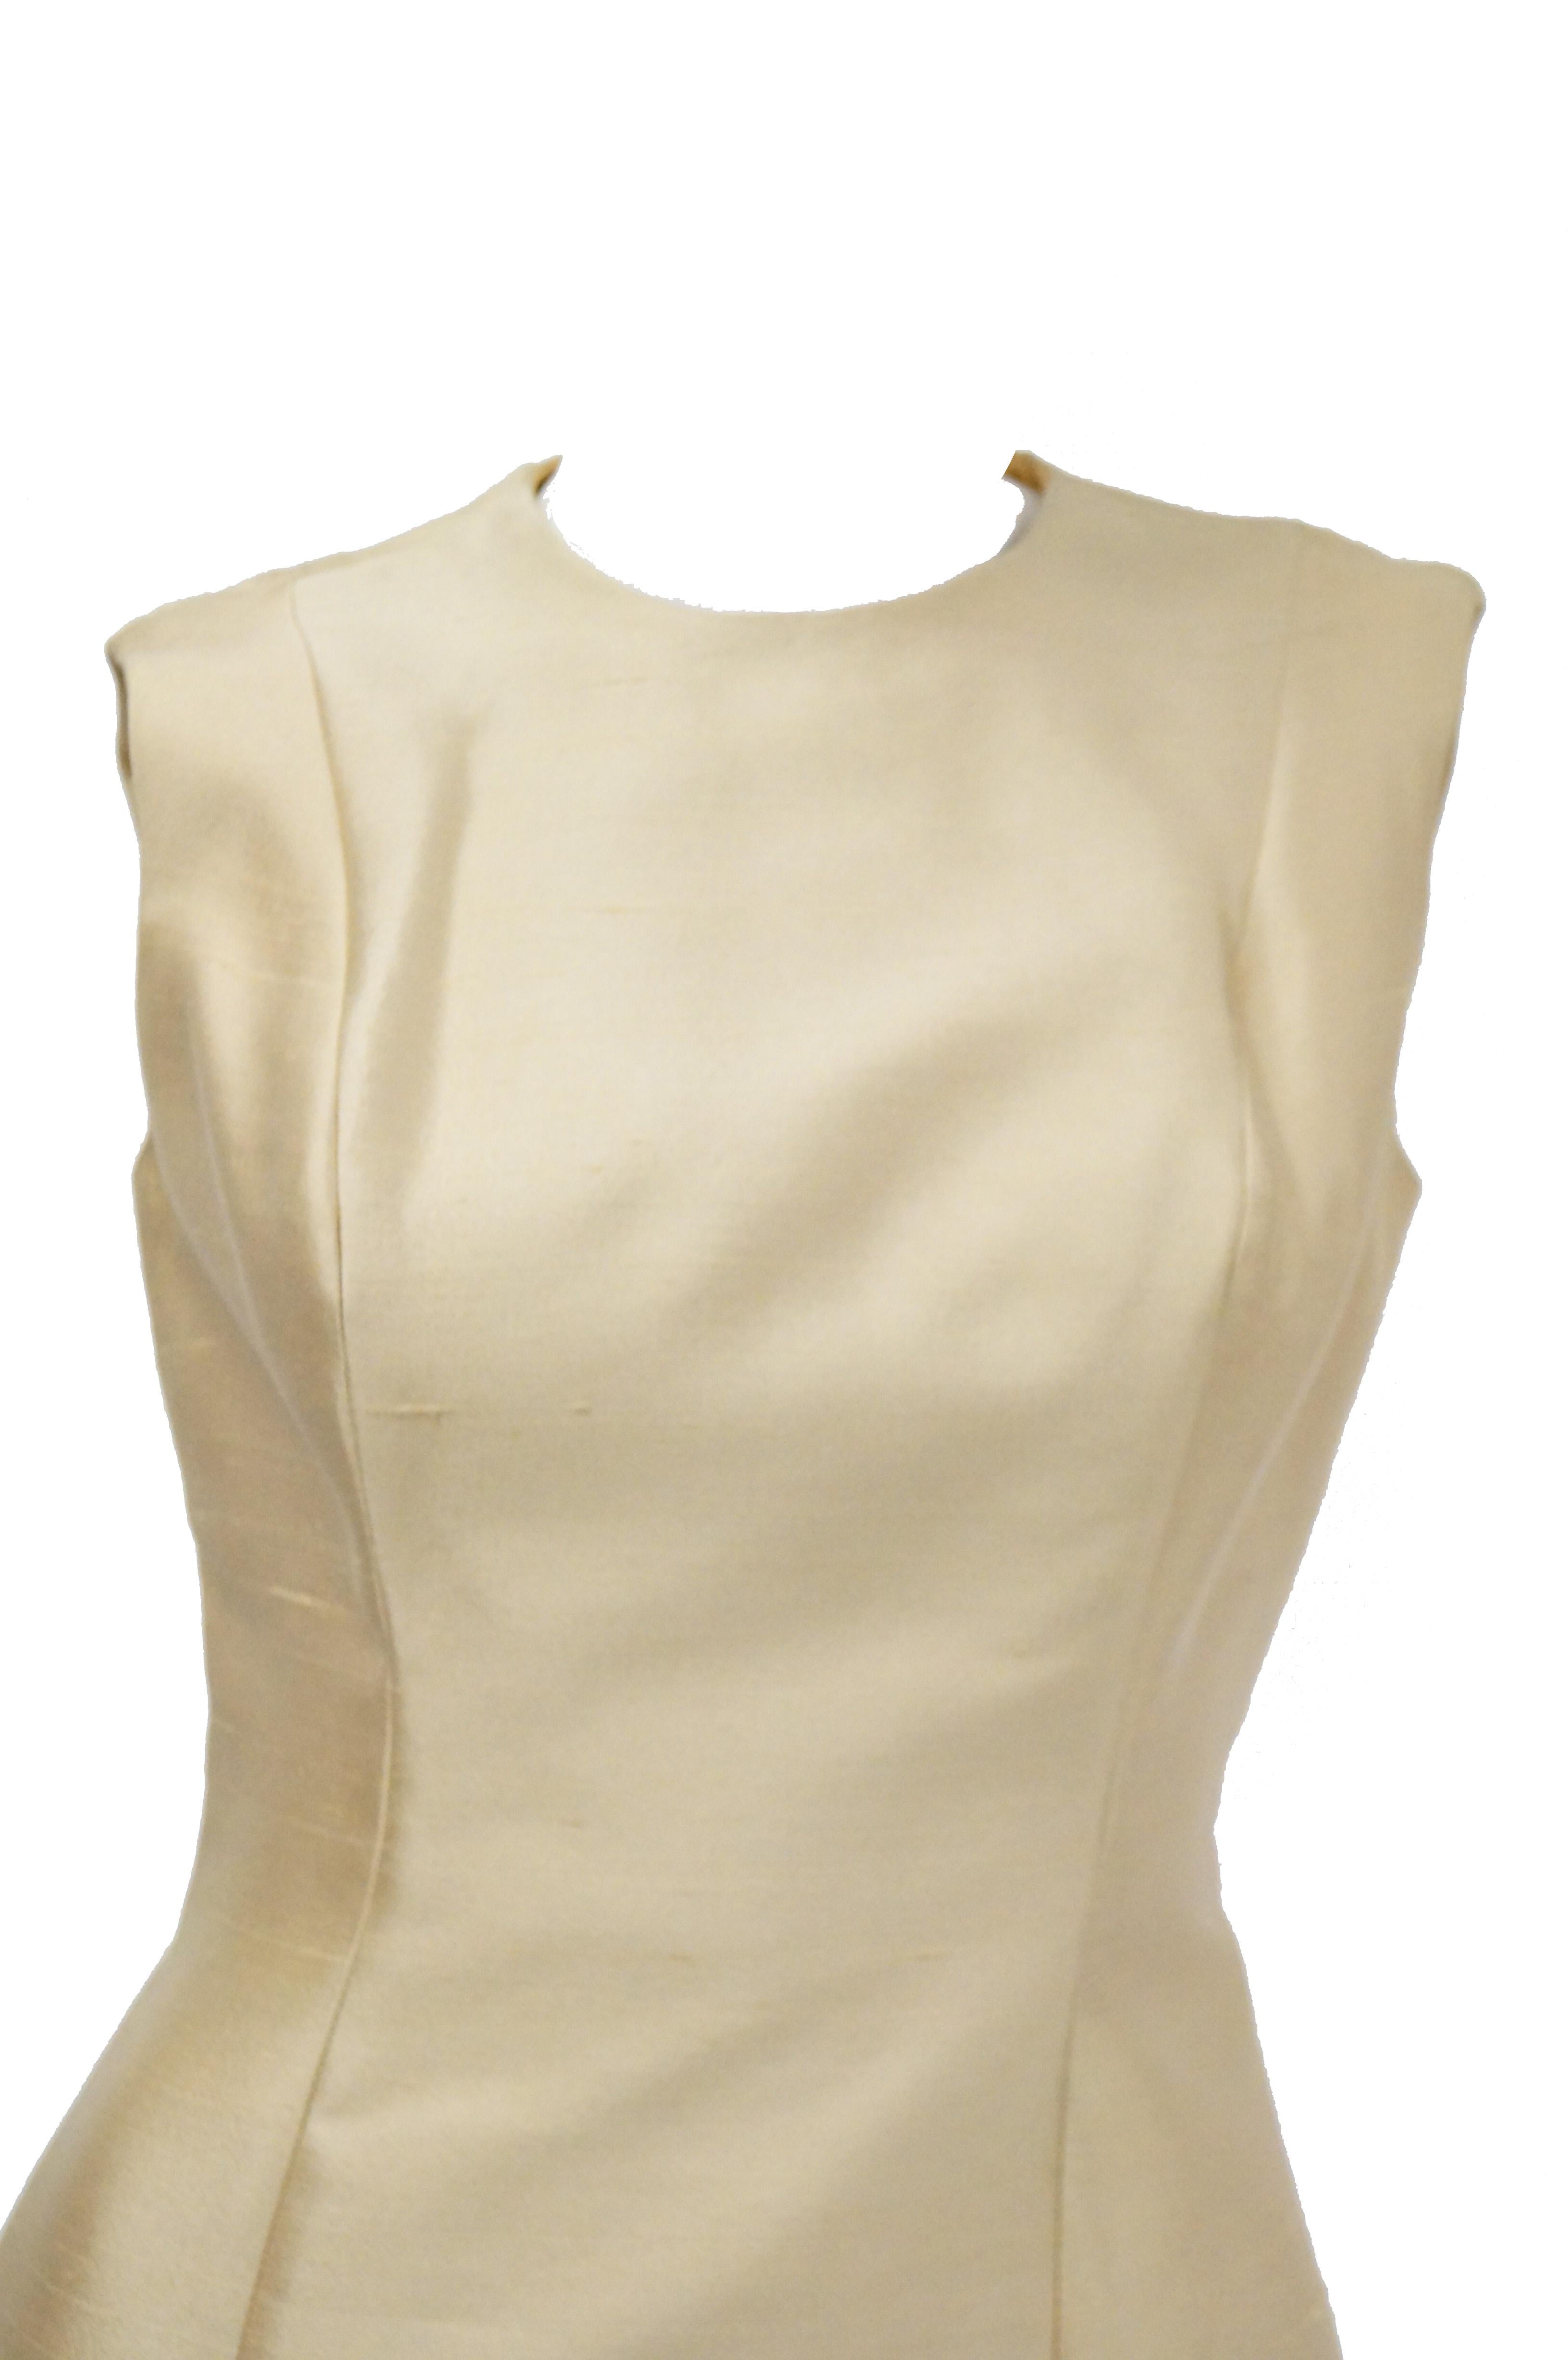 1960s Mardi Gras Champagne Gold Cocktail Sheath Dress with Bow Detail For Sale 1